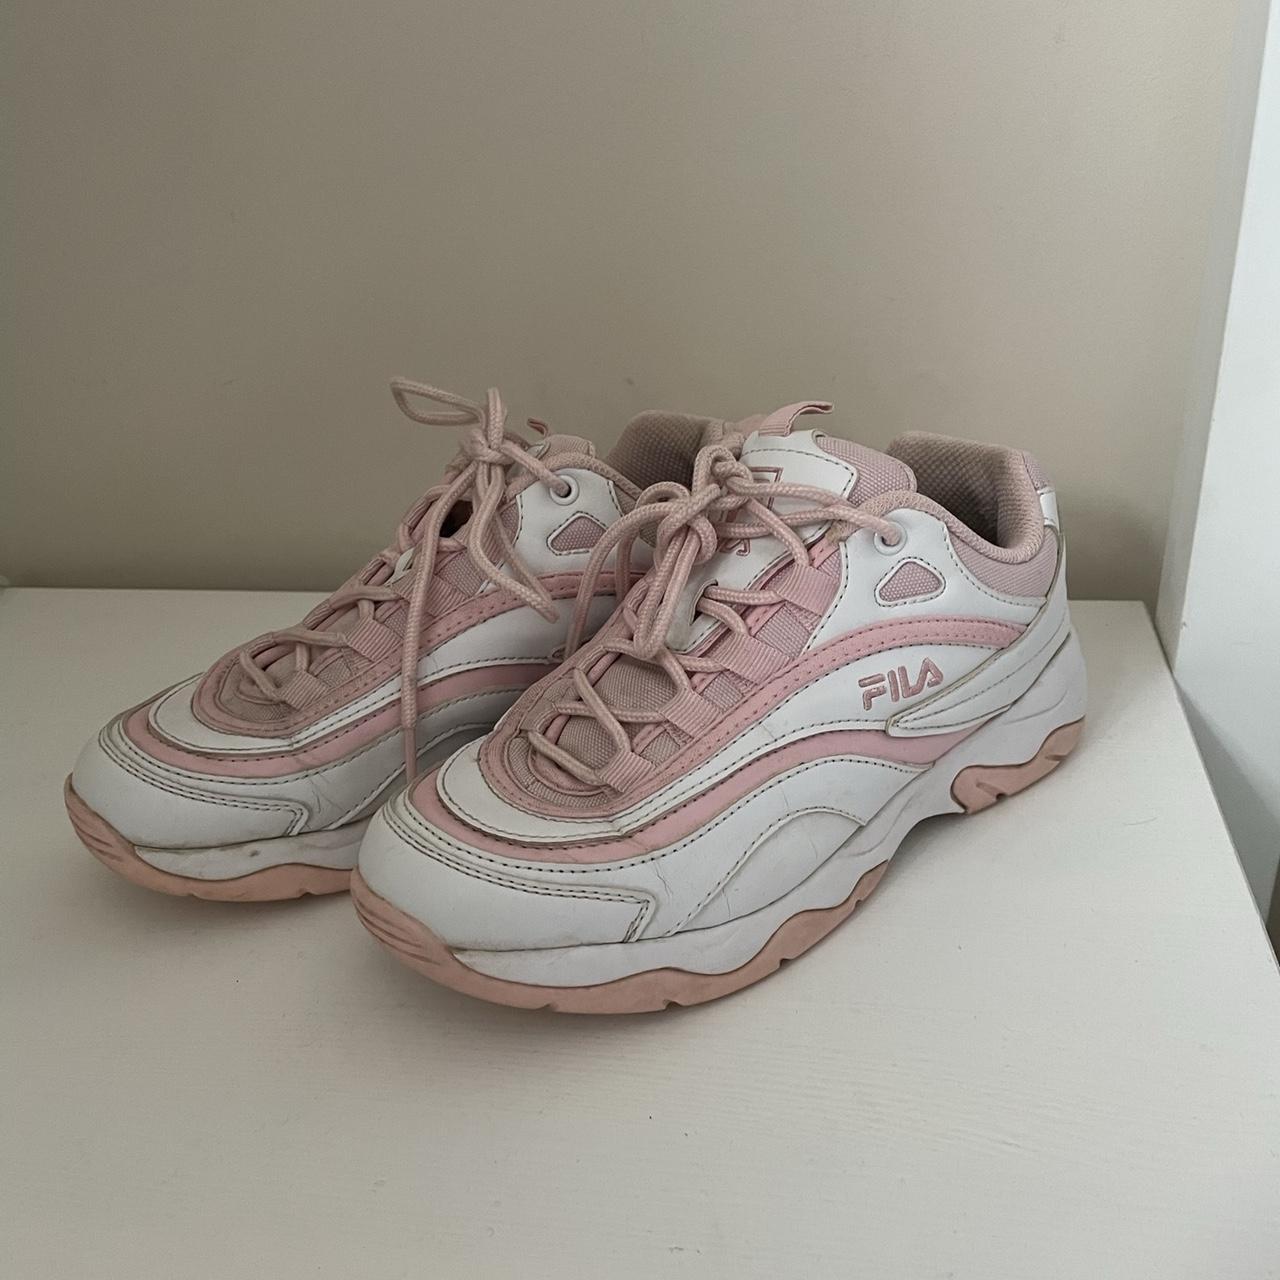 Fila Women's White and Pink Trainers | Depop